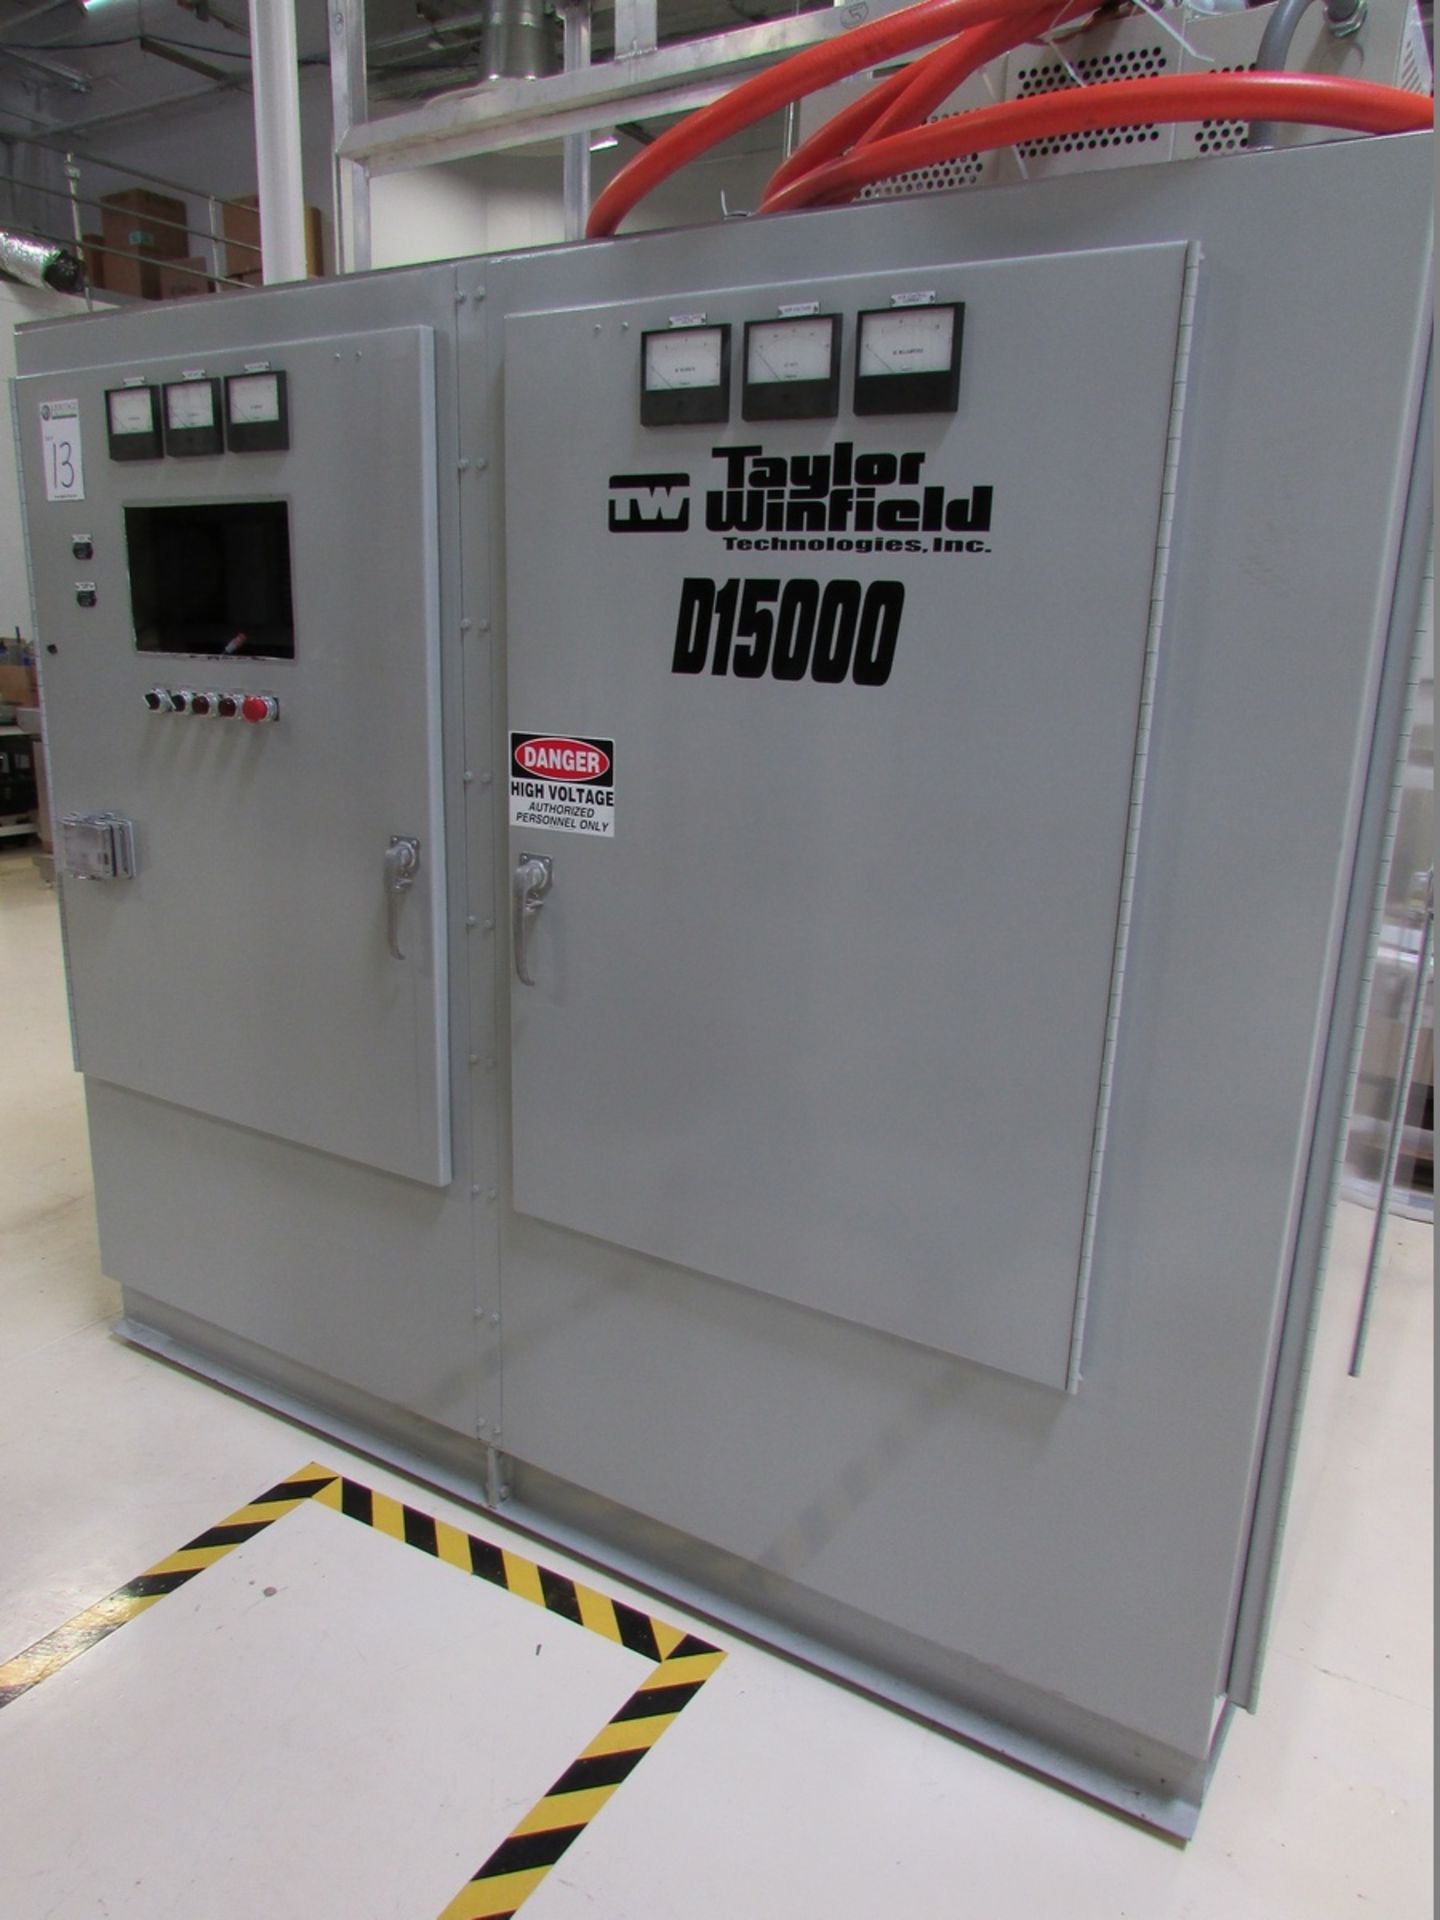 Taylor Winfield Technologies D15000 Induction Generator 480V 470A 390KVA 60Hz 3PH Input, 150KW 3- - Image 2 of 28